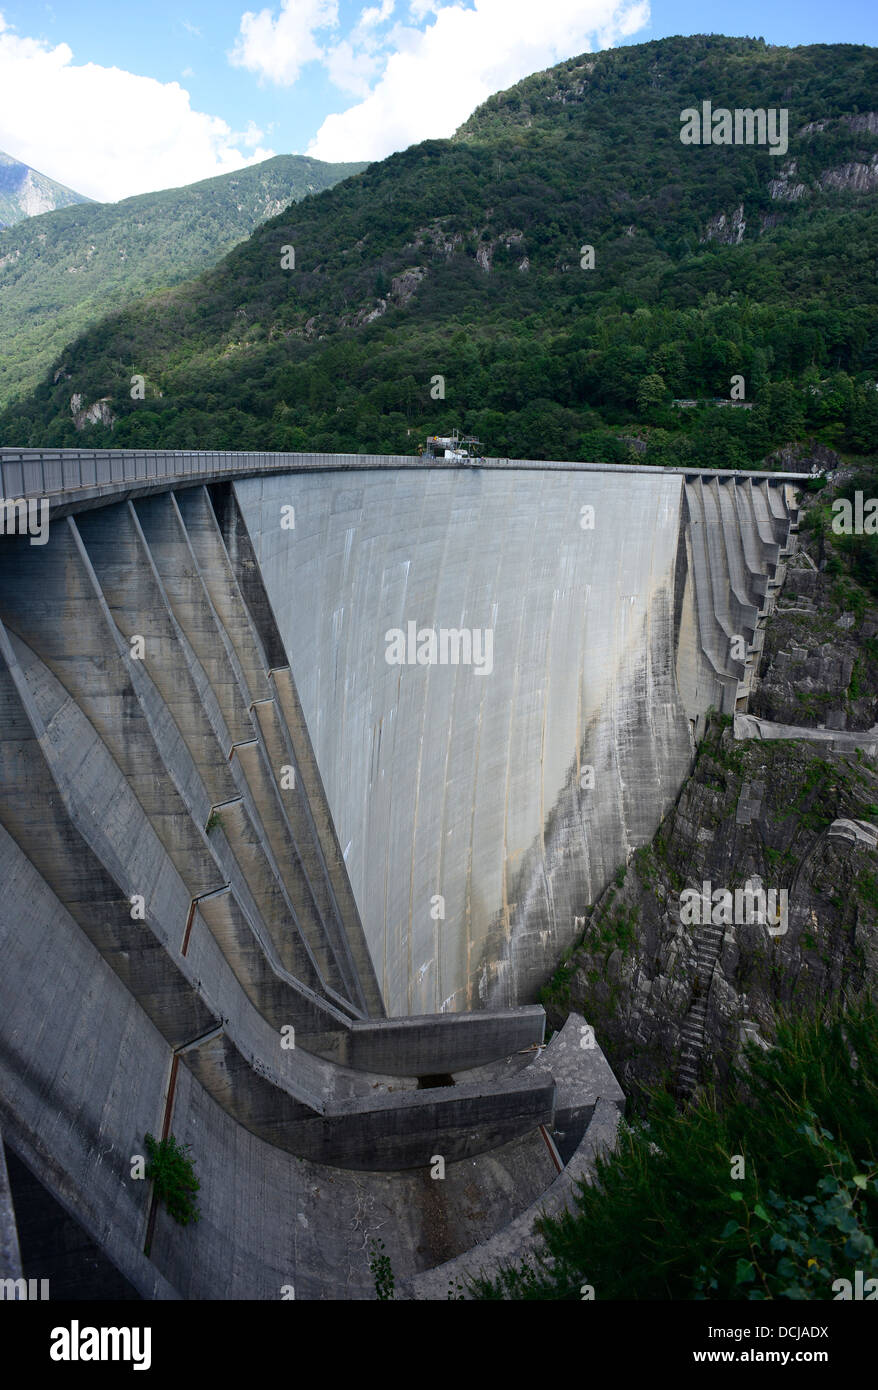 The Contra Dam, also known as the Verzasca Dam and Locarno Dam on the  Verzasca River Switzerland. Used in the movie Goldeneye Stock Photo - Alamy